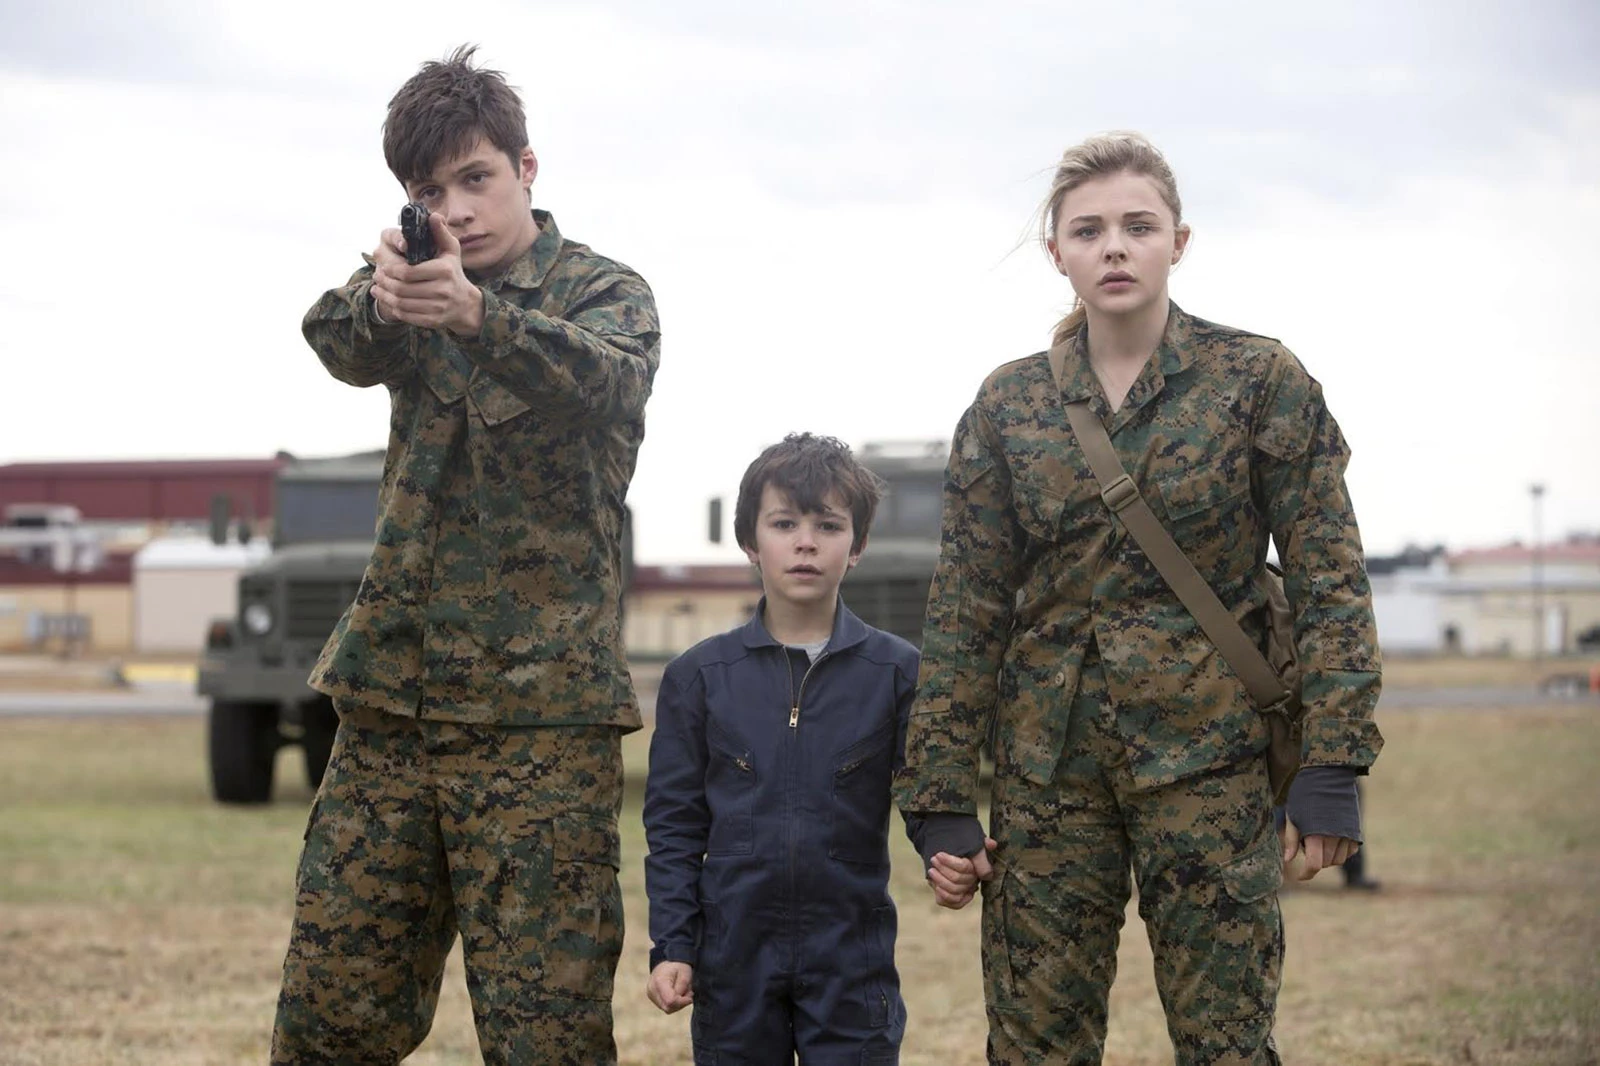 The 5th Wave (2016) - dystopian movie like Divergent